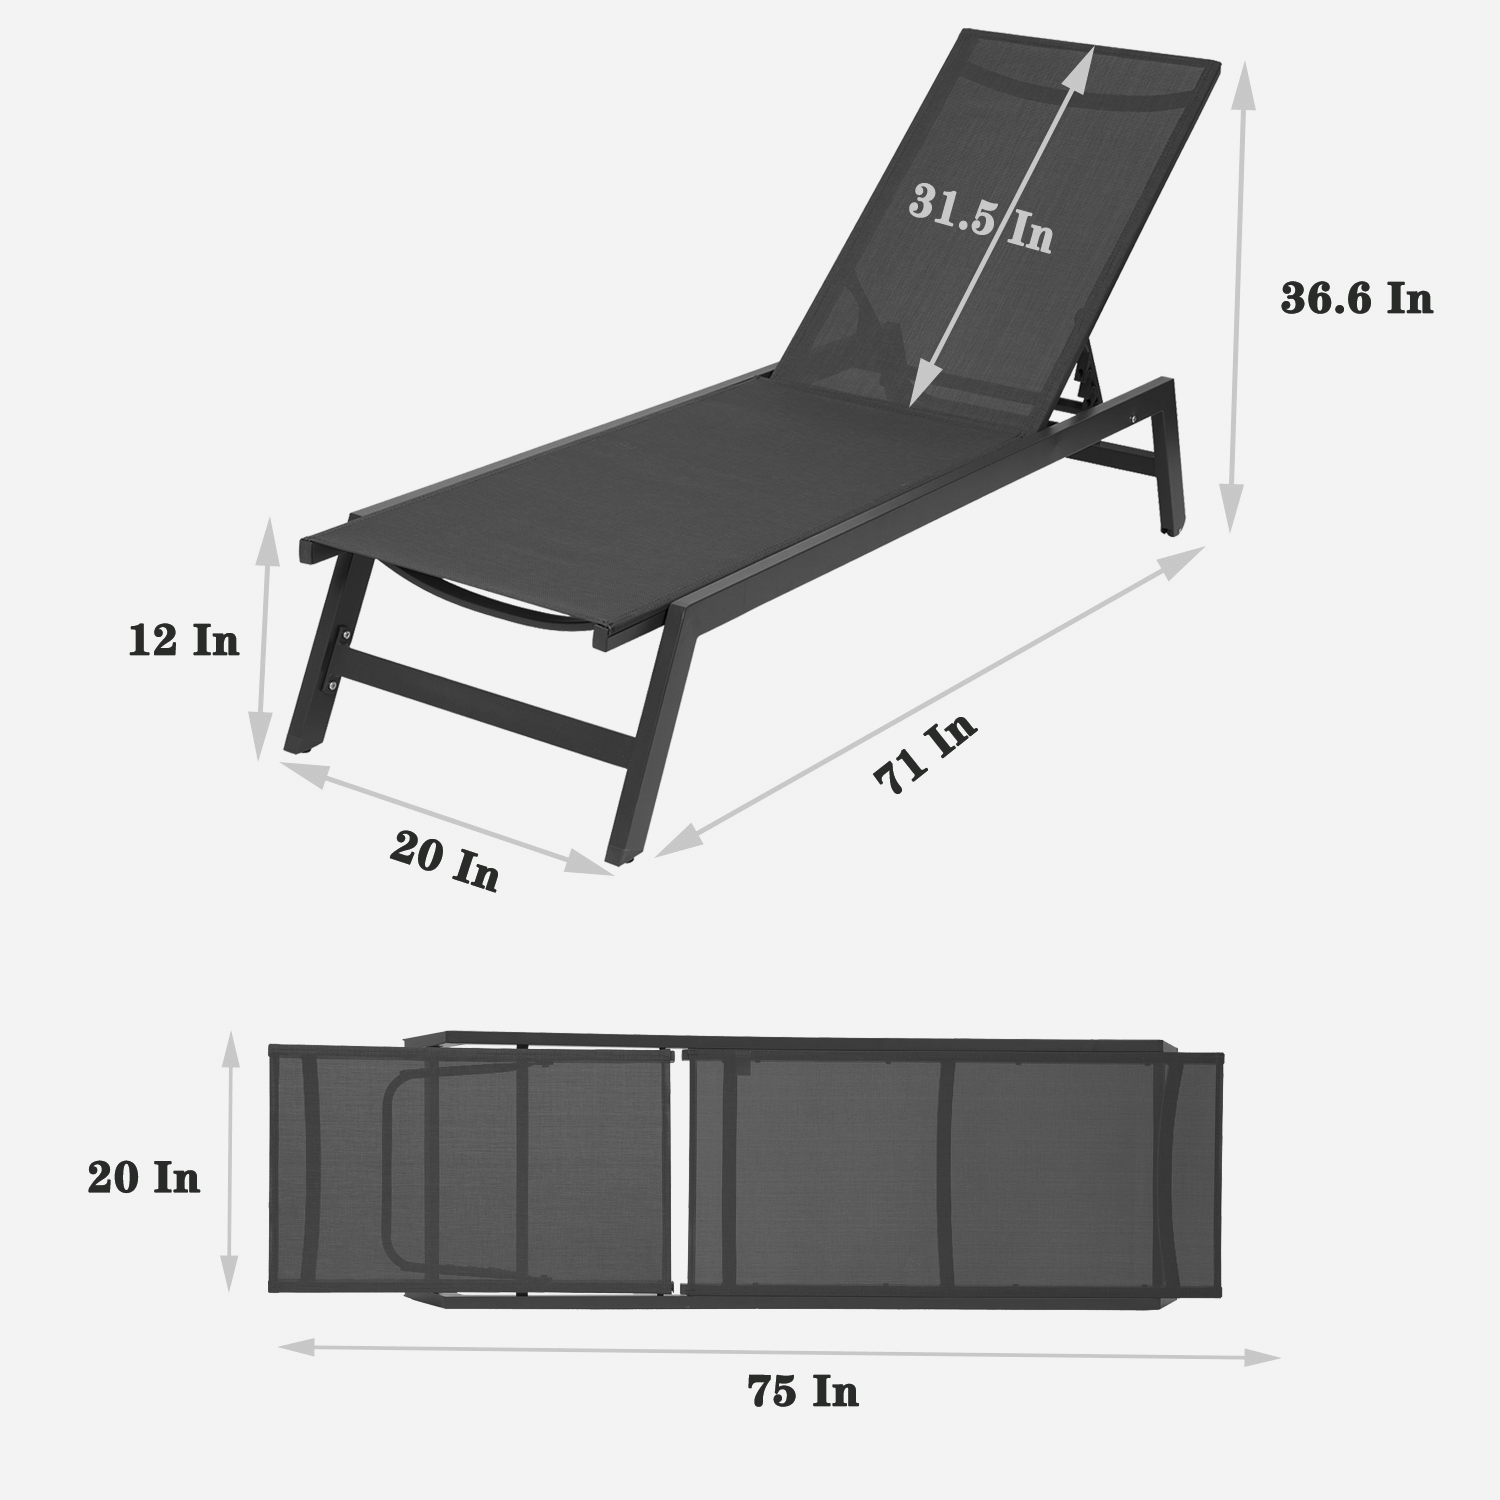 Seizeen Outdoor Chaise Lounge Chair, Five-Position Adjustable Patio Lounge Chair for Poolside Deck Porch Backyard, Black Aluminum Frame Furniture Set with Wheels - image 5 of 11